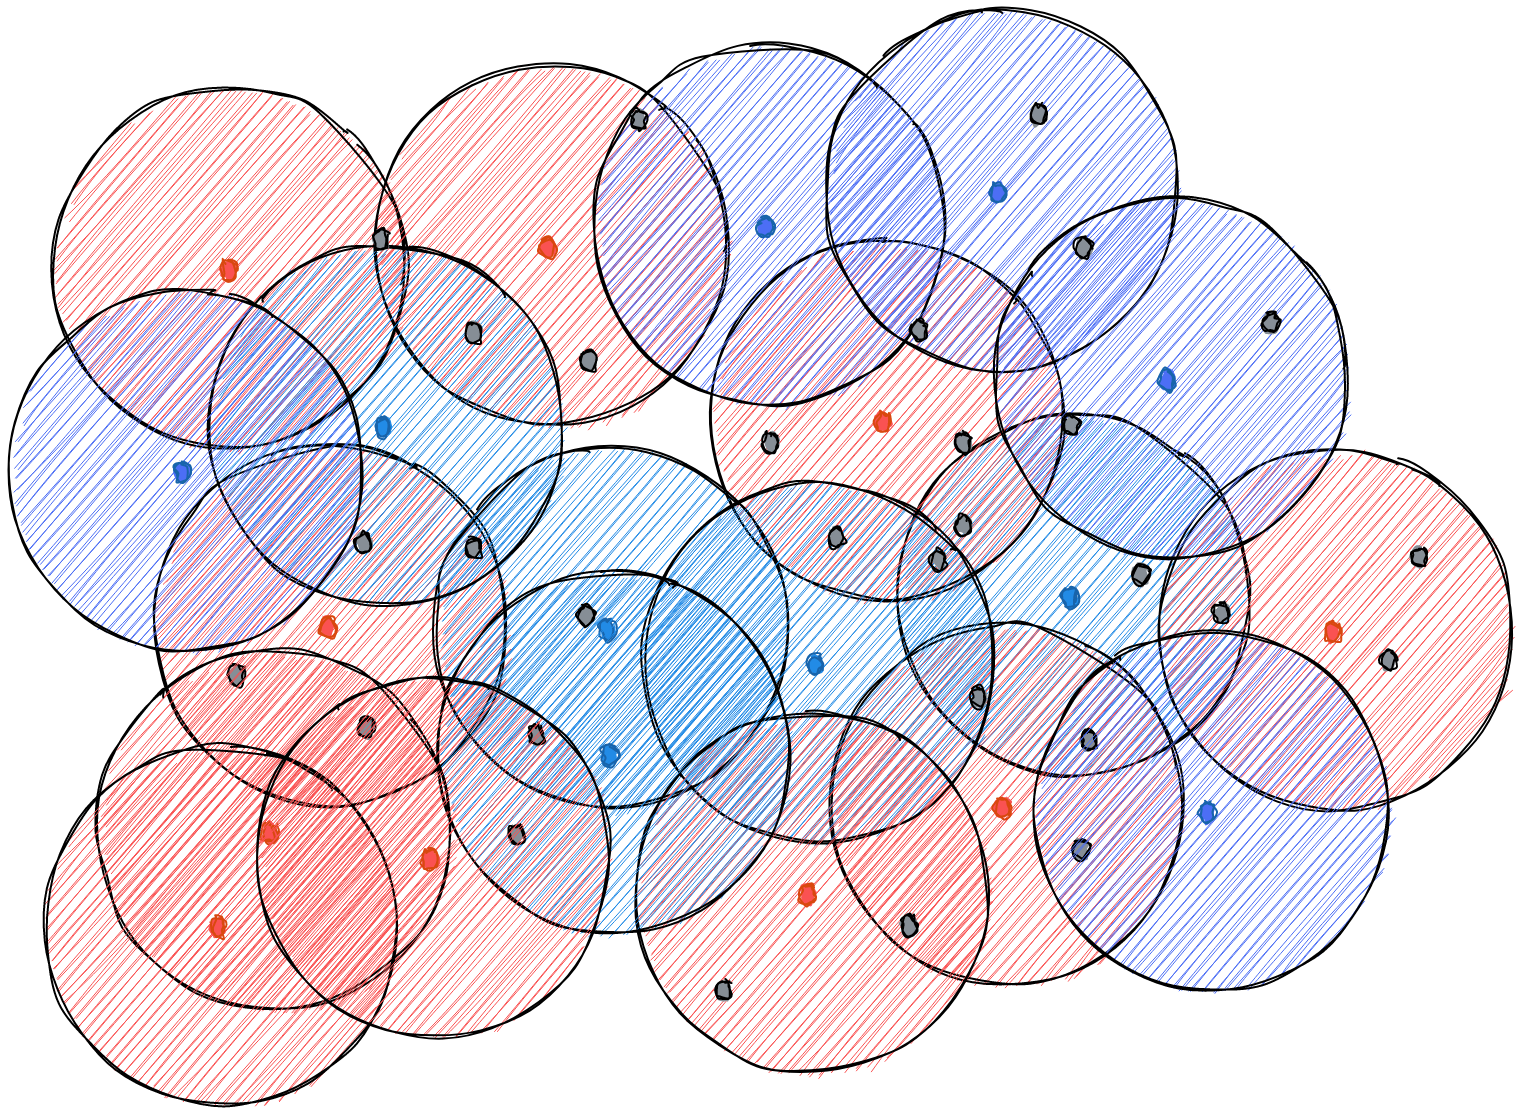 Red and blue points on a plane, with some red points and some blue points having a circle around them.